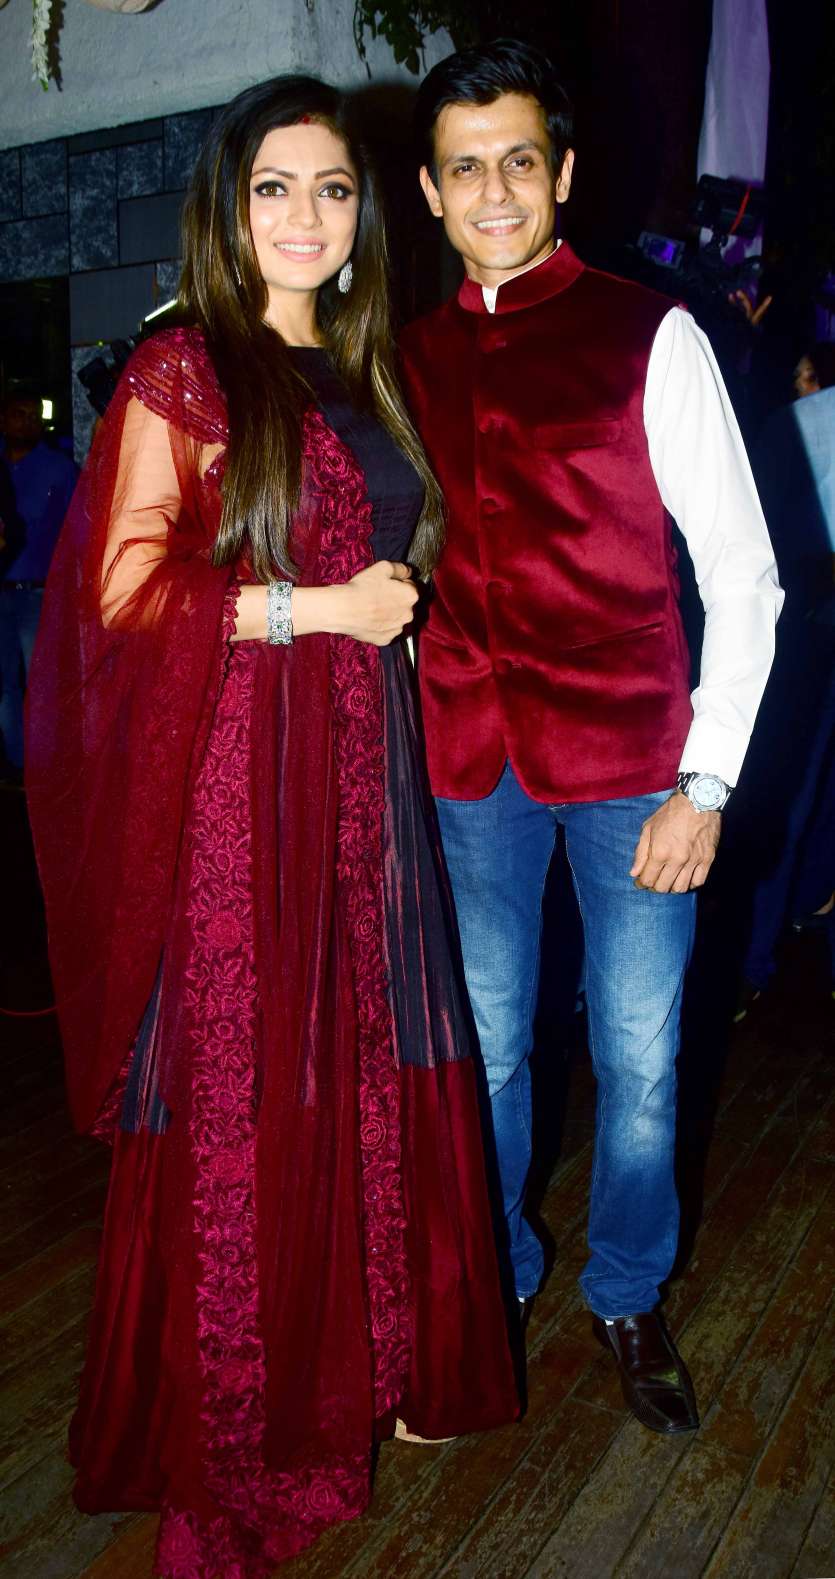 Everyone's favourite Drashti Dhami opted for a wine coloured outfit to add glamour to the evening. He was accompanied by husband Neeraj Khemka.